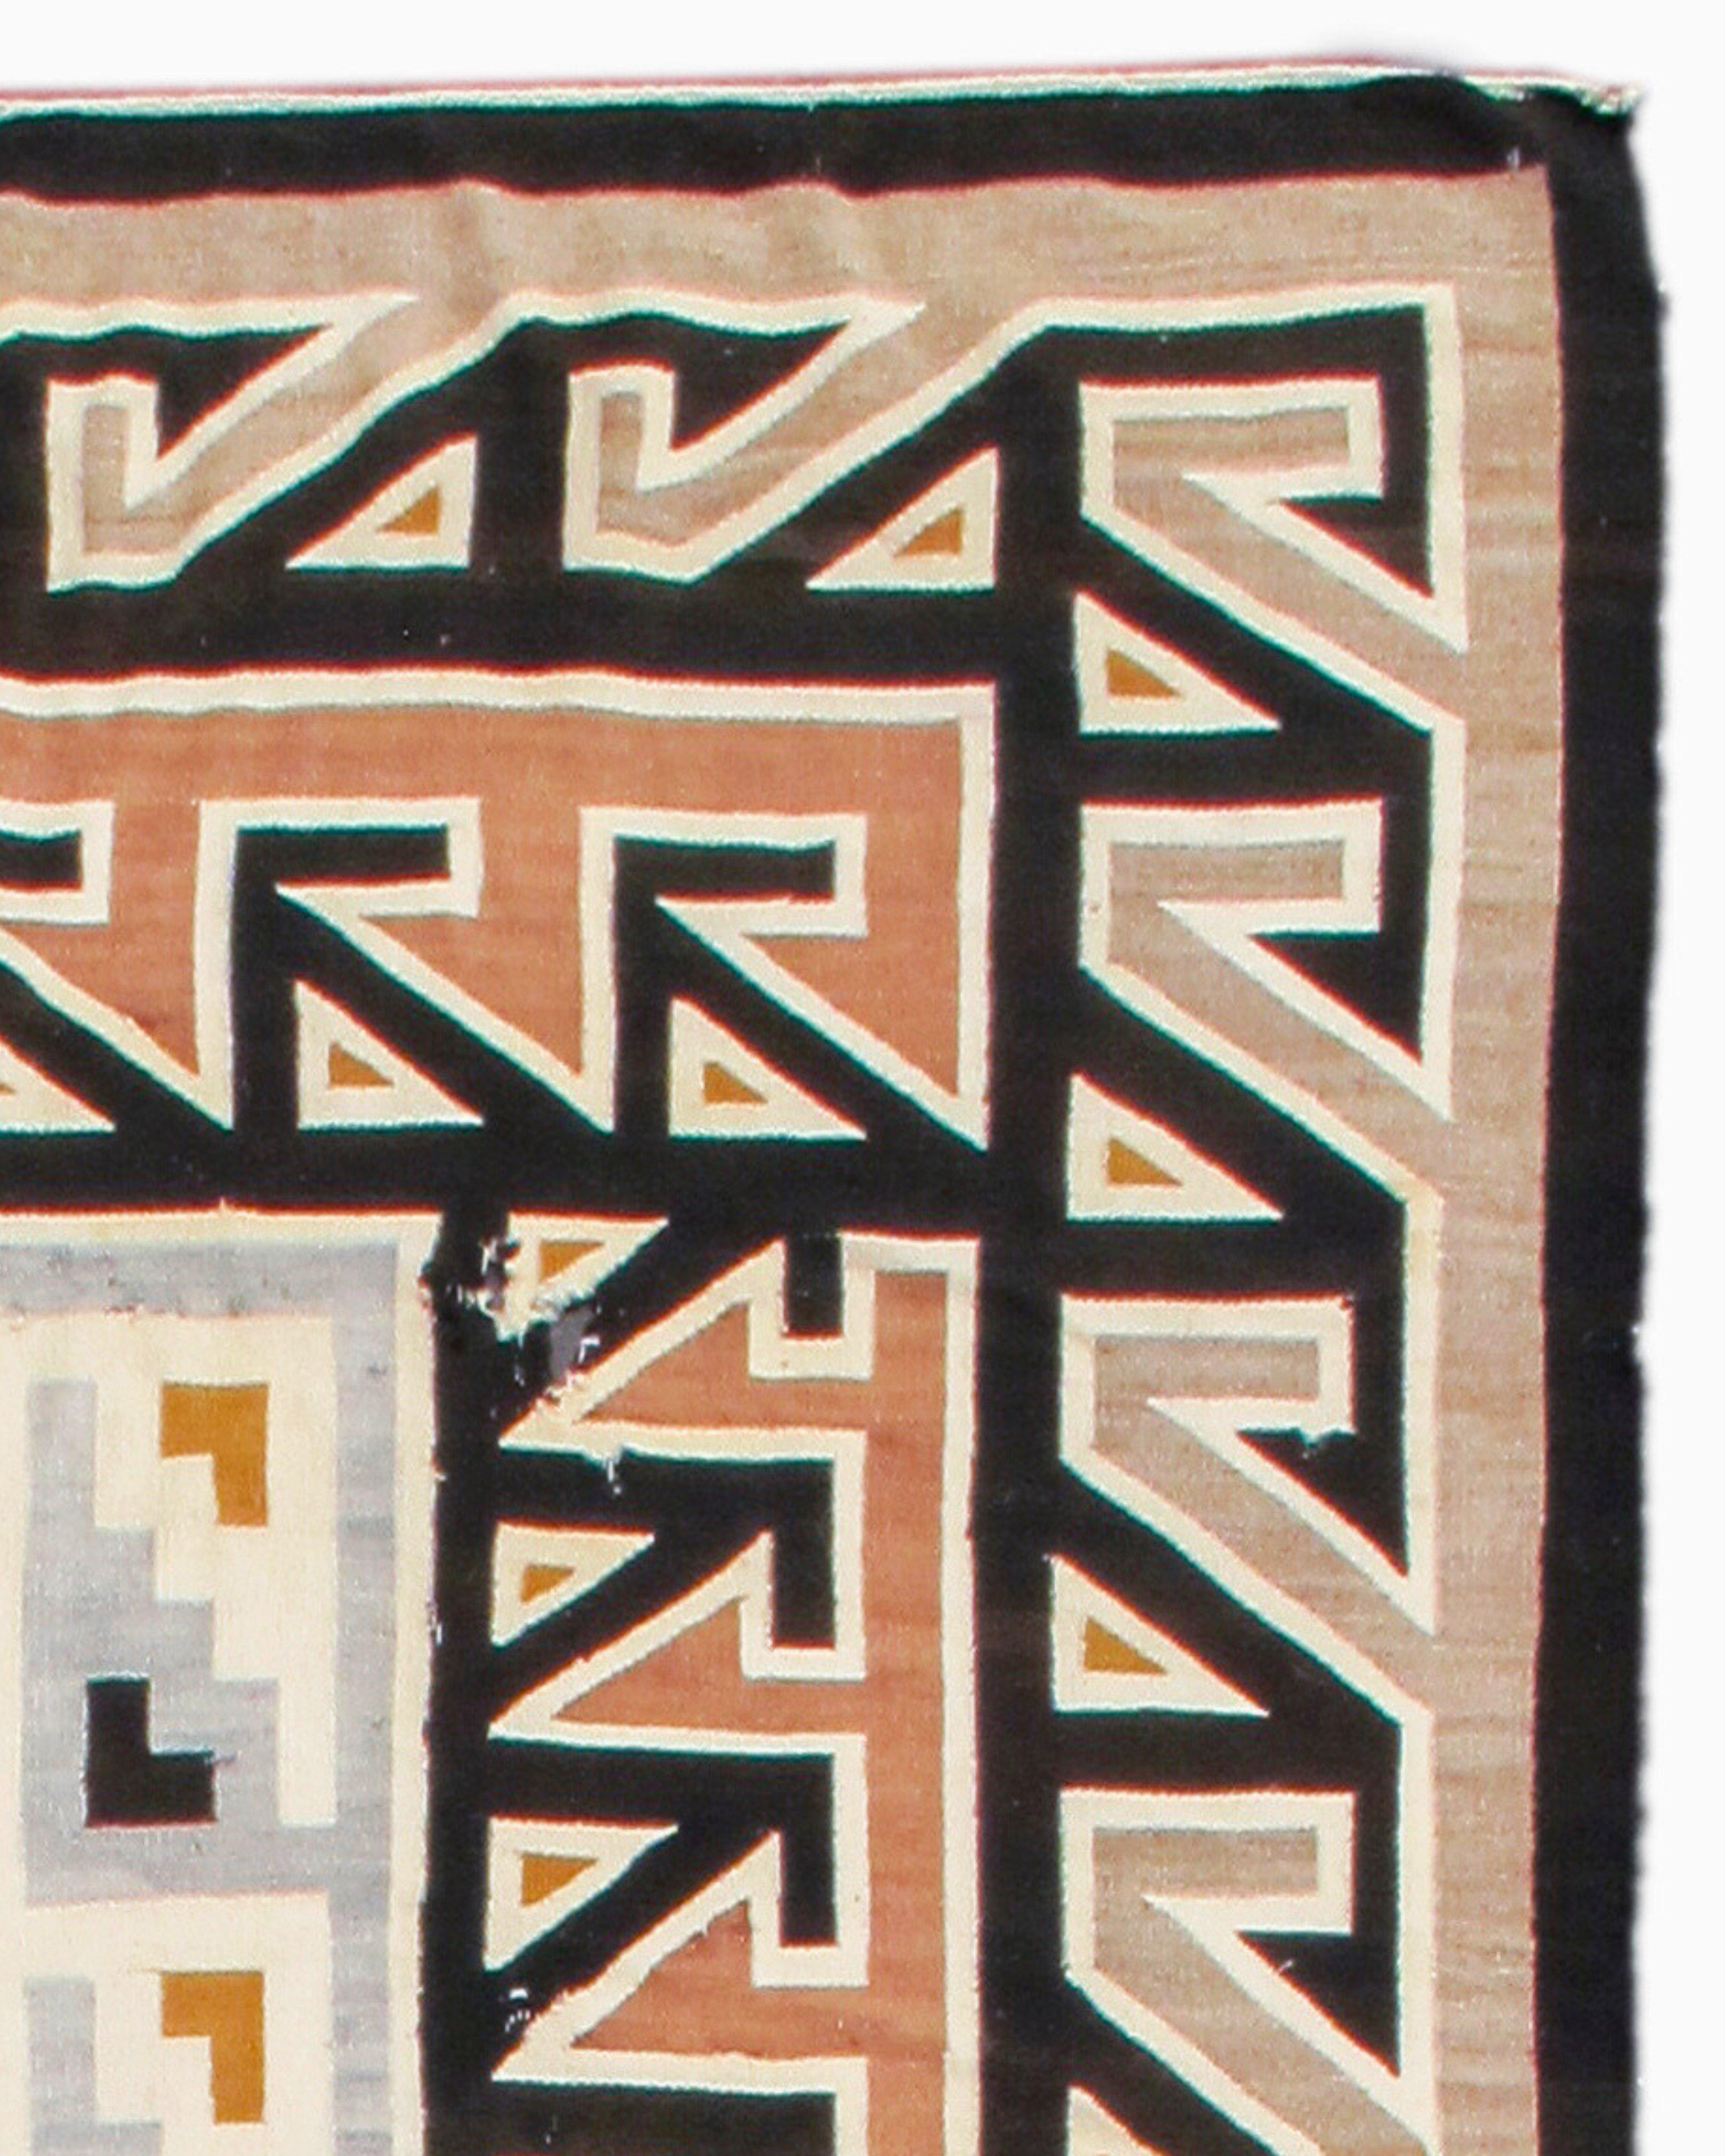 Antique Teec Nos Pos Navajo Rug, Early 20th Century

Teec Nos Pos is a small community in Apache County, Arizona. The community is located six miles southeast of the Four Corners Monument. The name Teec Nos Pos is pronounced 